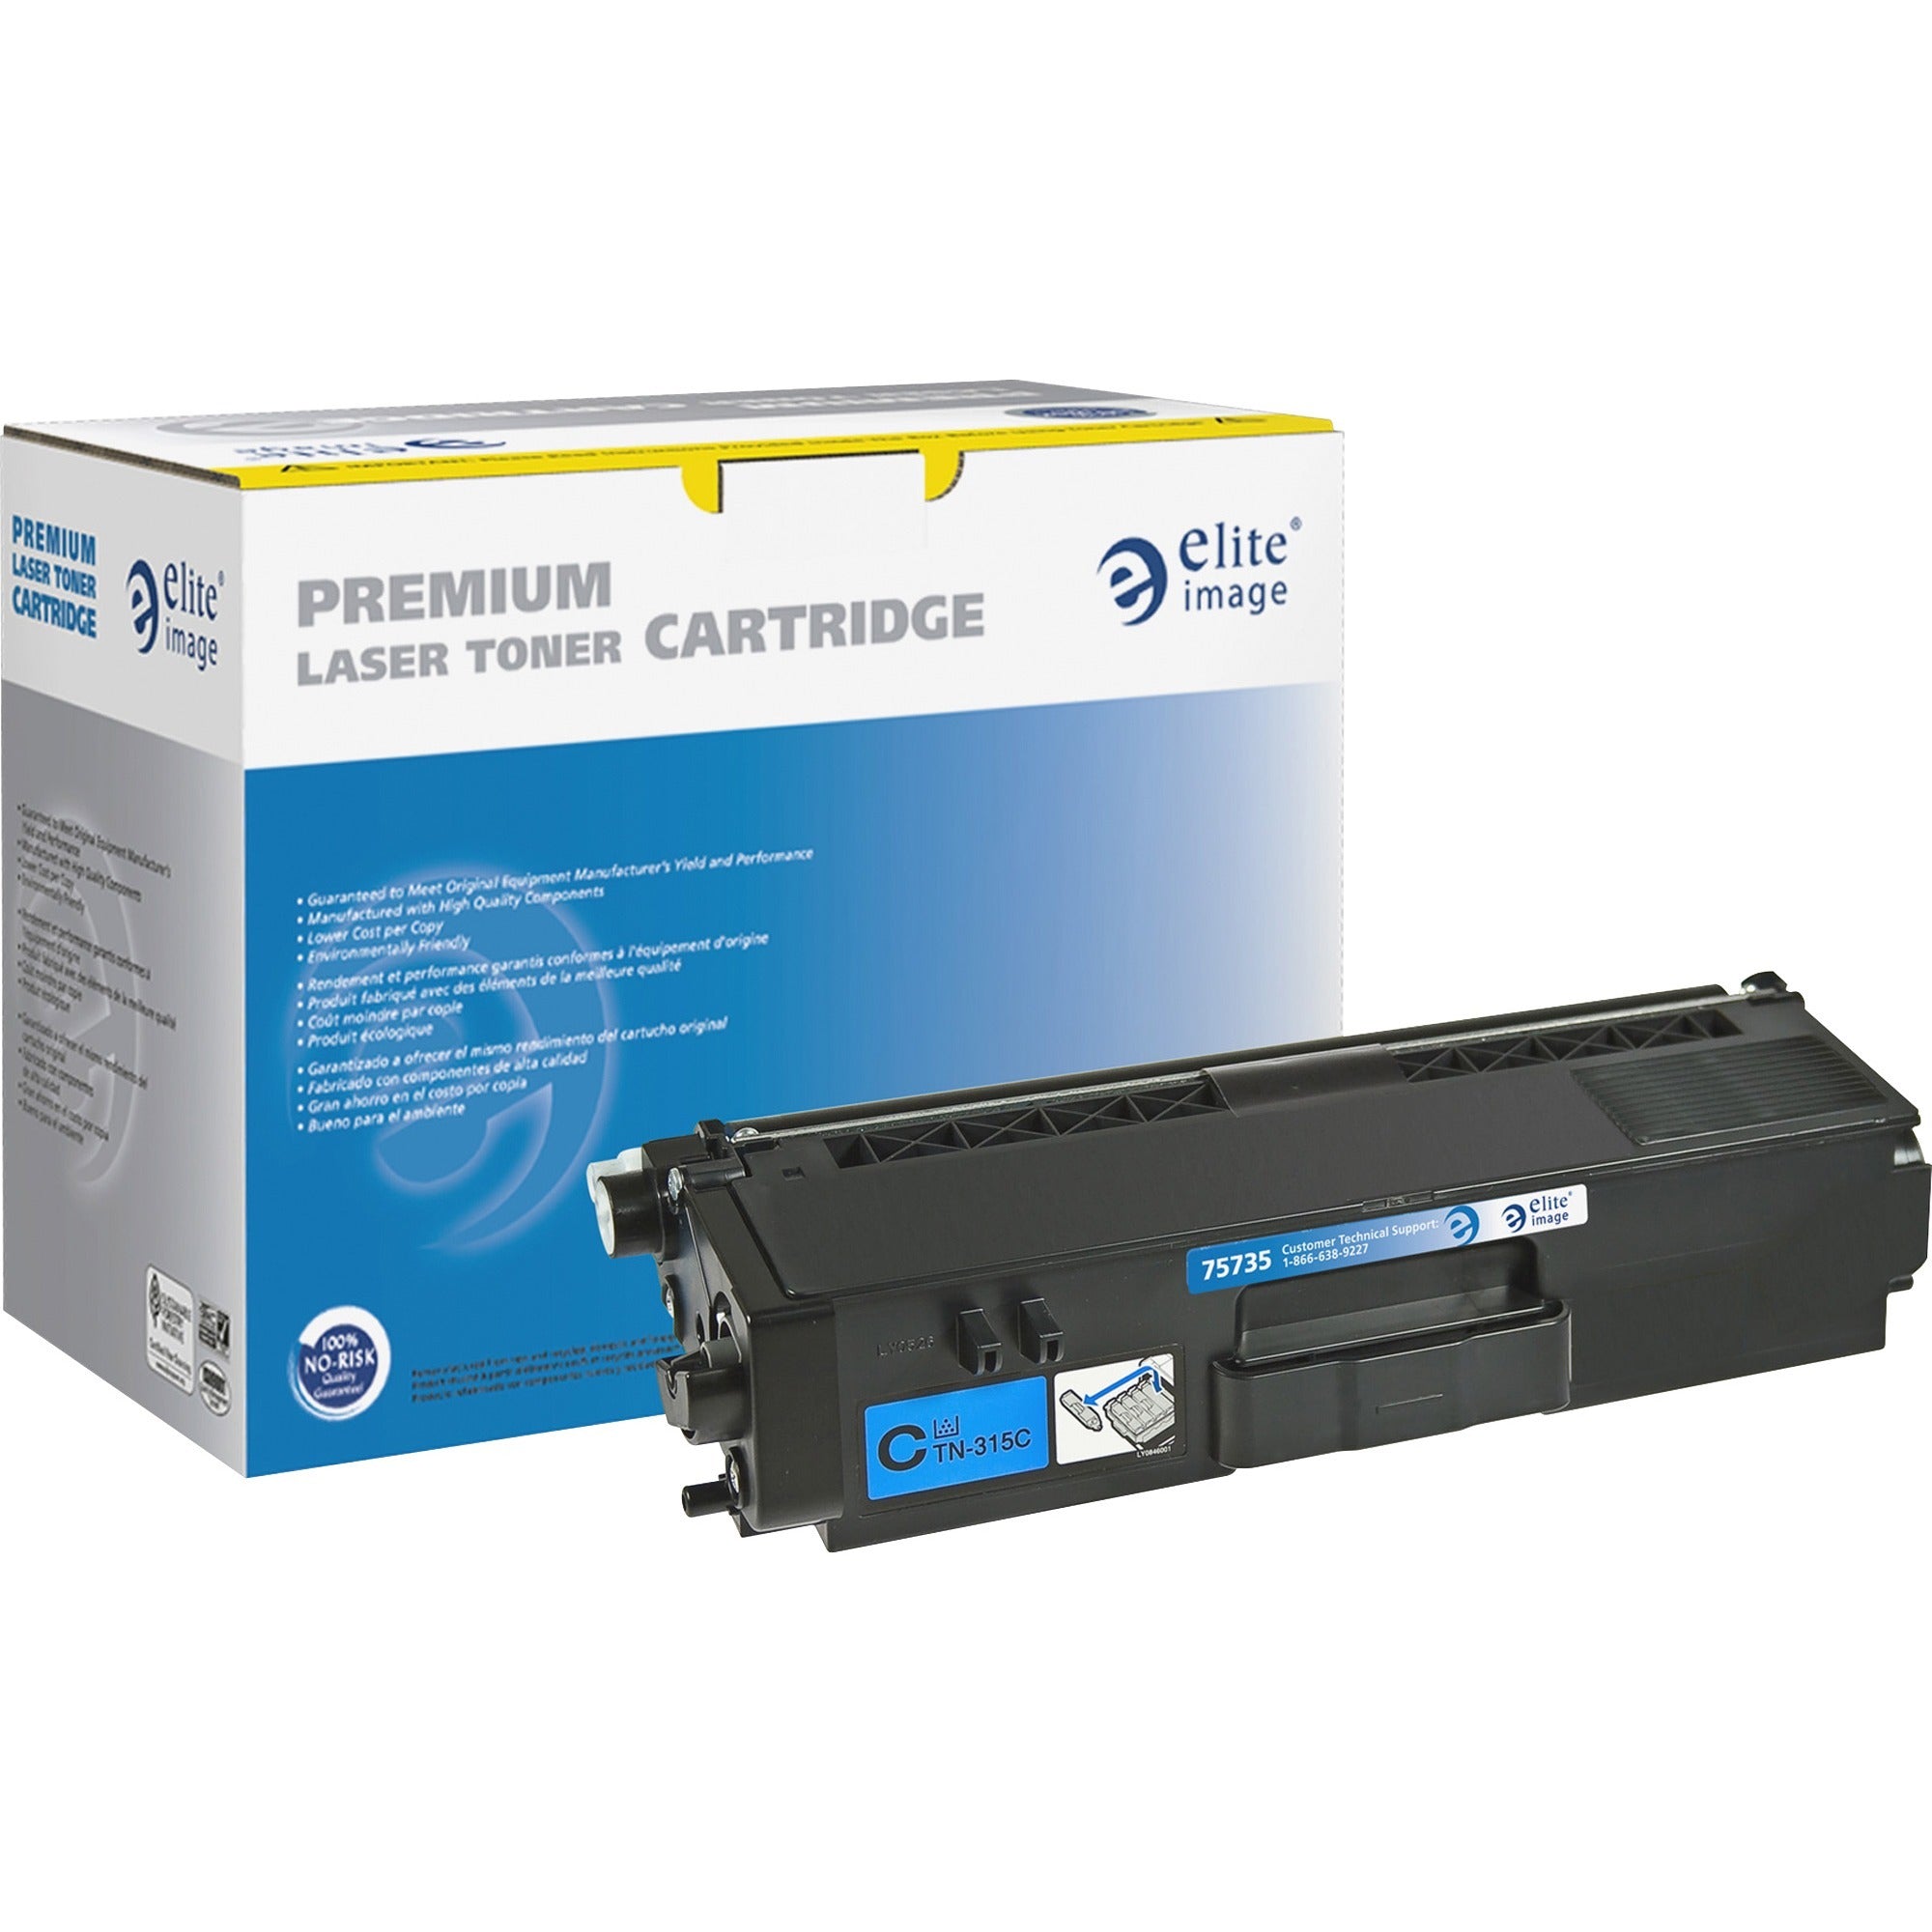 Elite Image Remanufactured High Yield Laser Toner Cartridge - Alternative for Brother TN315 - Cyan - 1 Each - 3500 Pages - 1